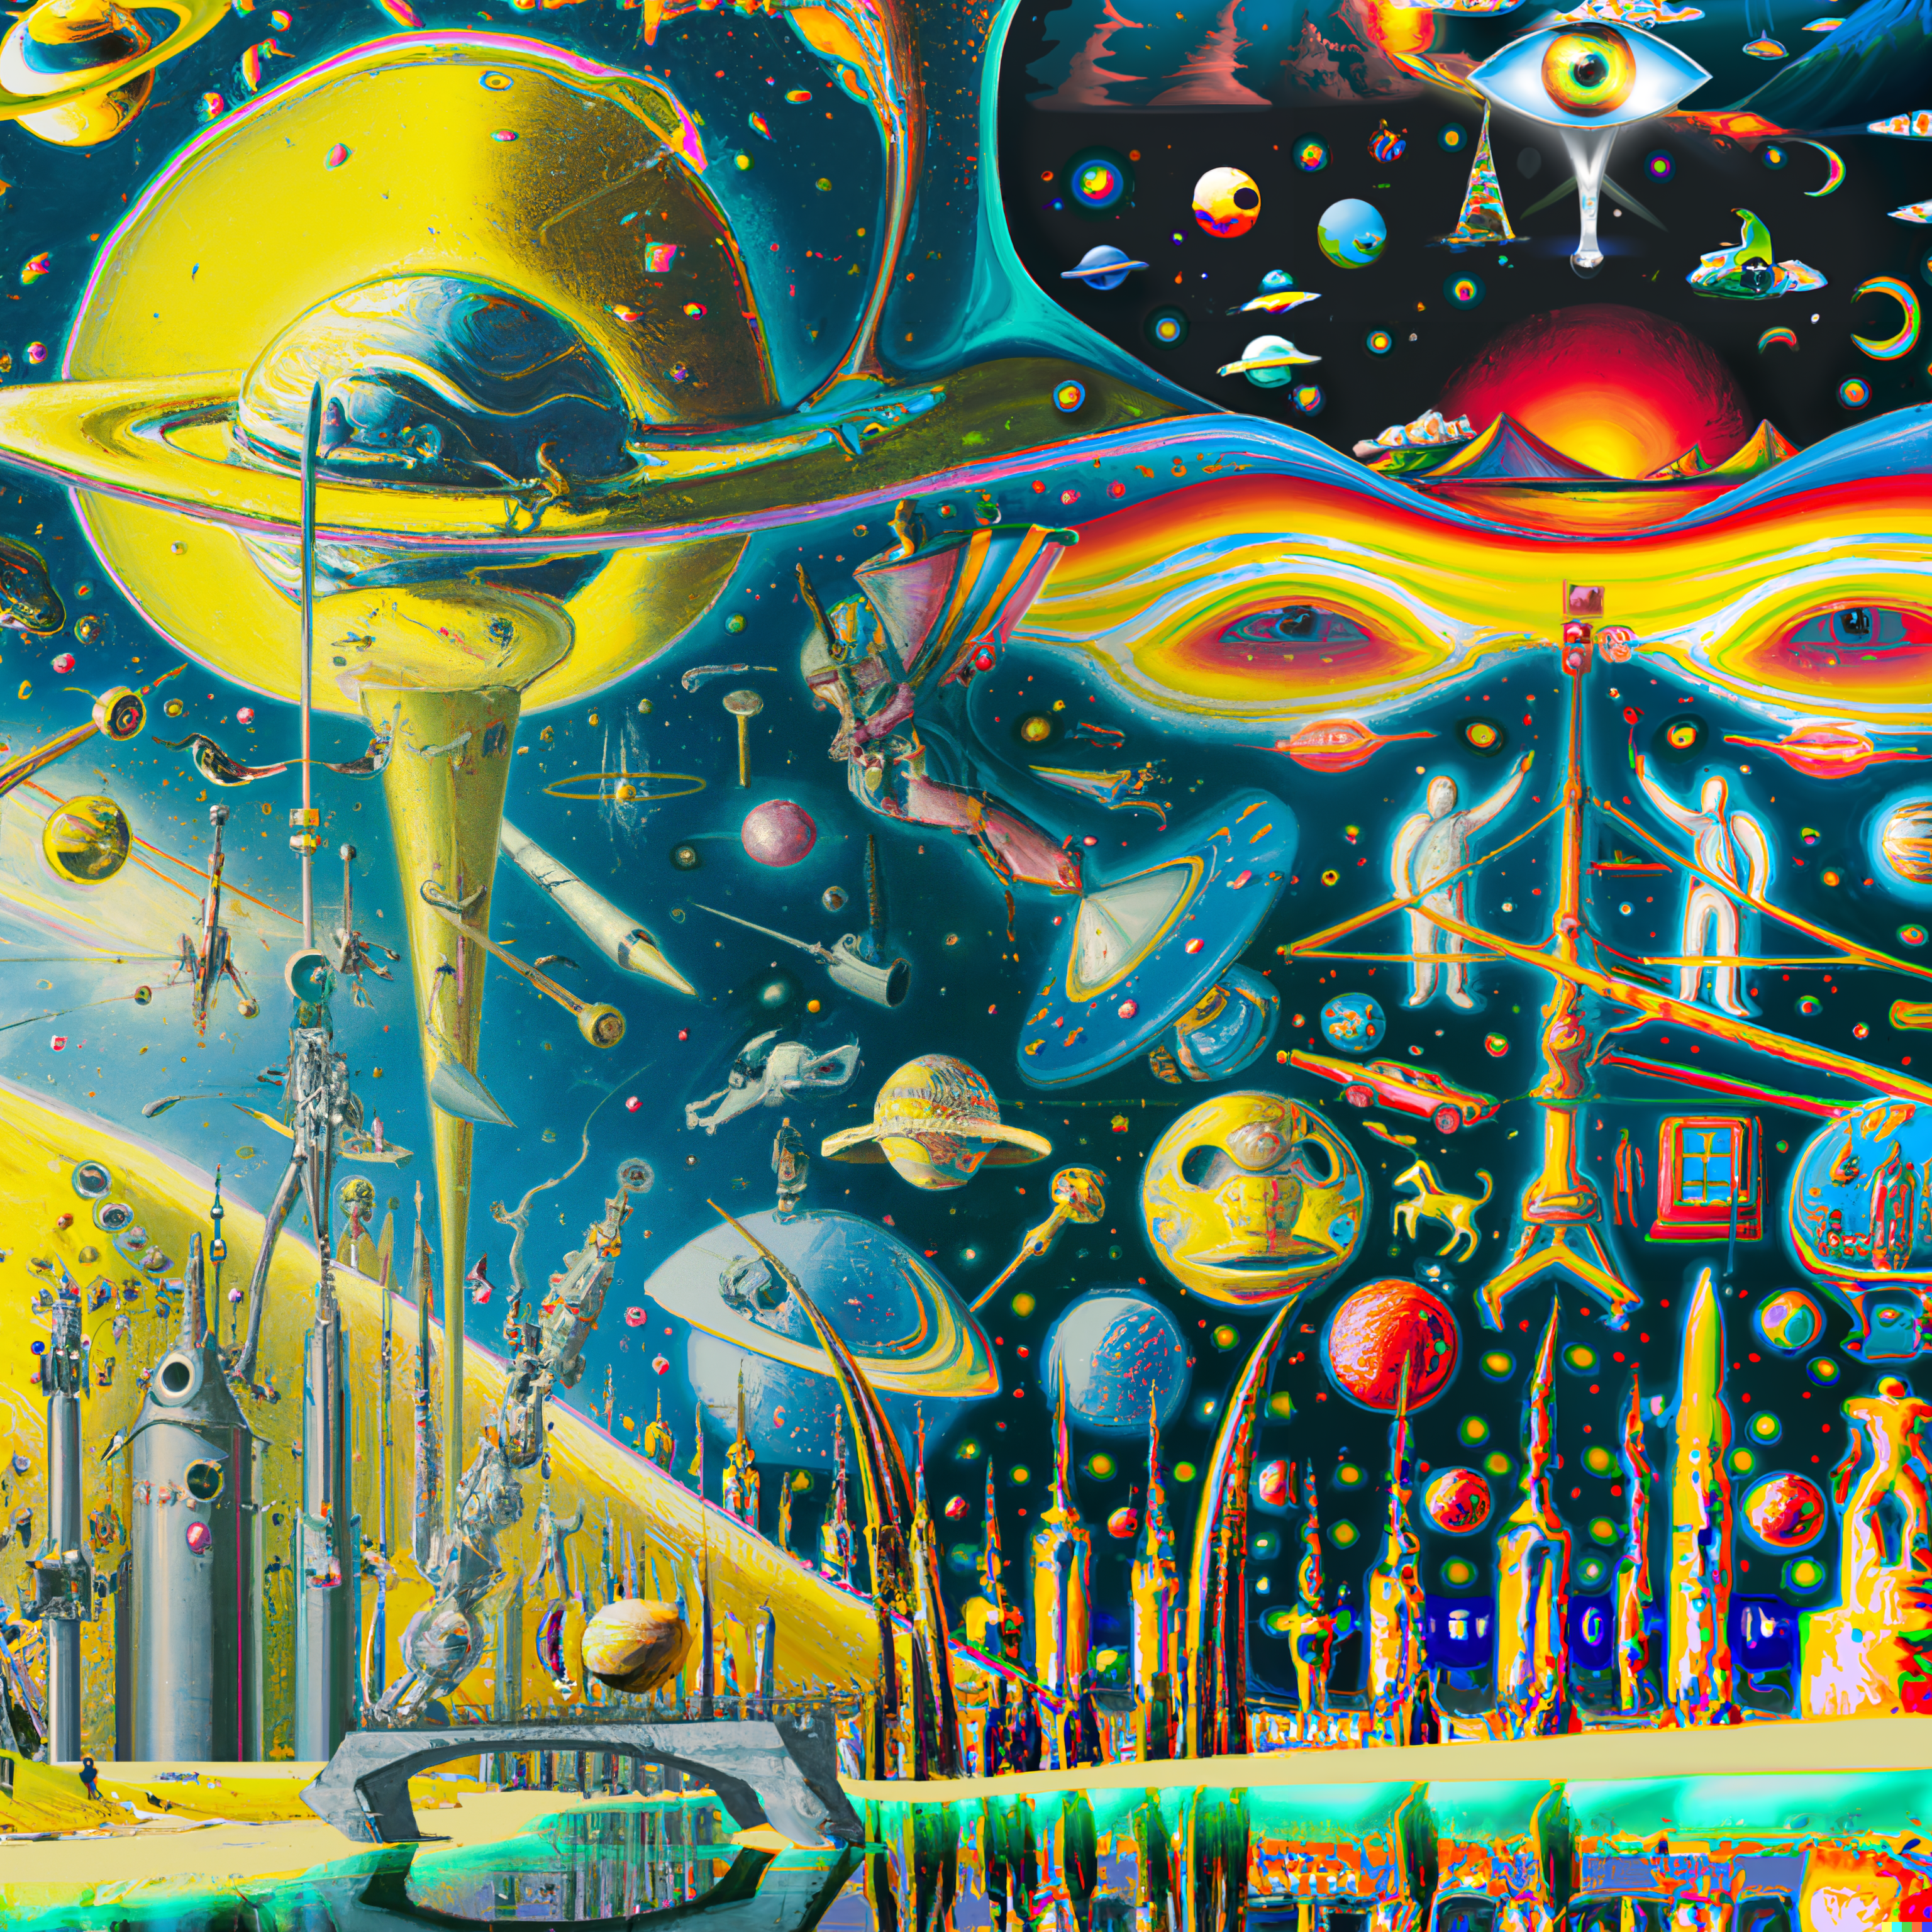 A painting, in the style of Salvador Dalí, that shows a large number of planets and spacecraft above the surface of a yellow planet, with a bridge over water and strange buildings reflected in the pool